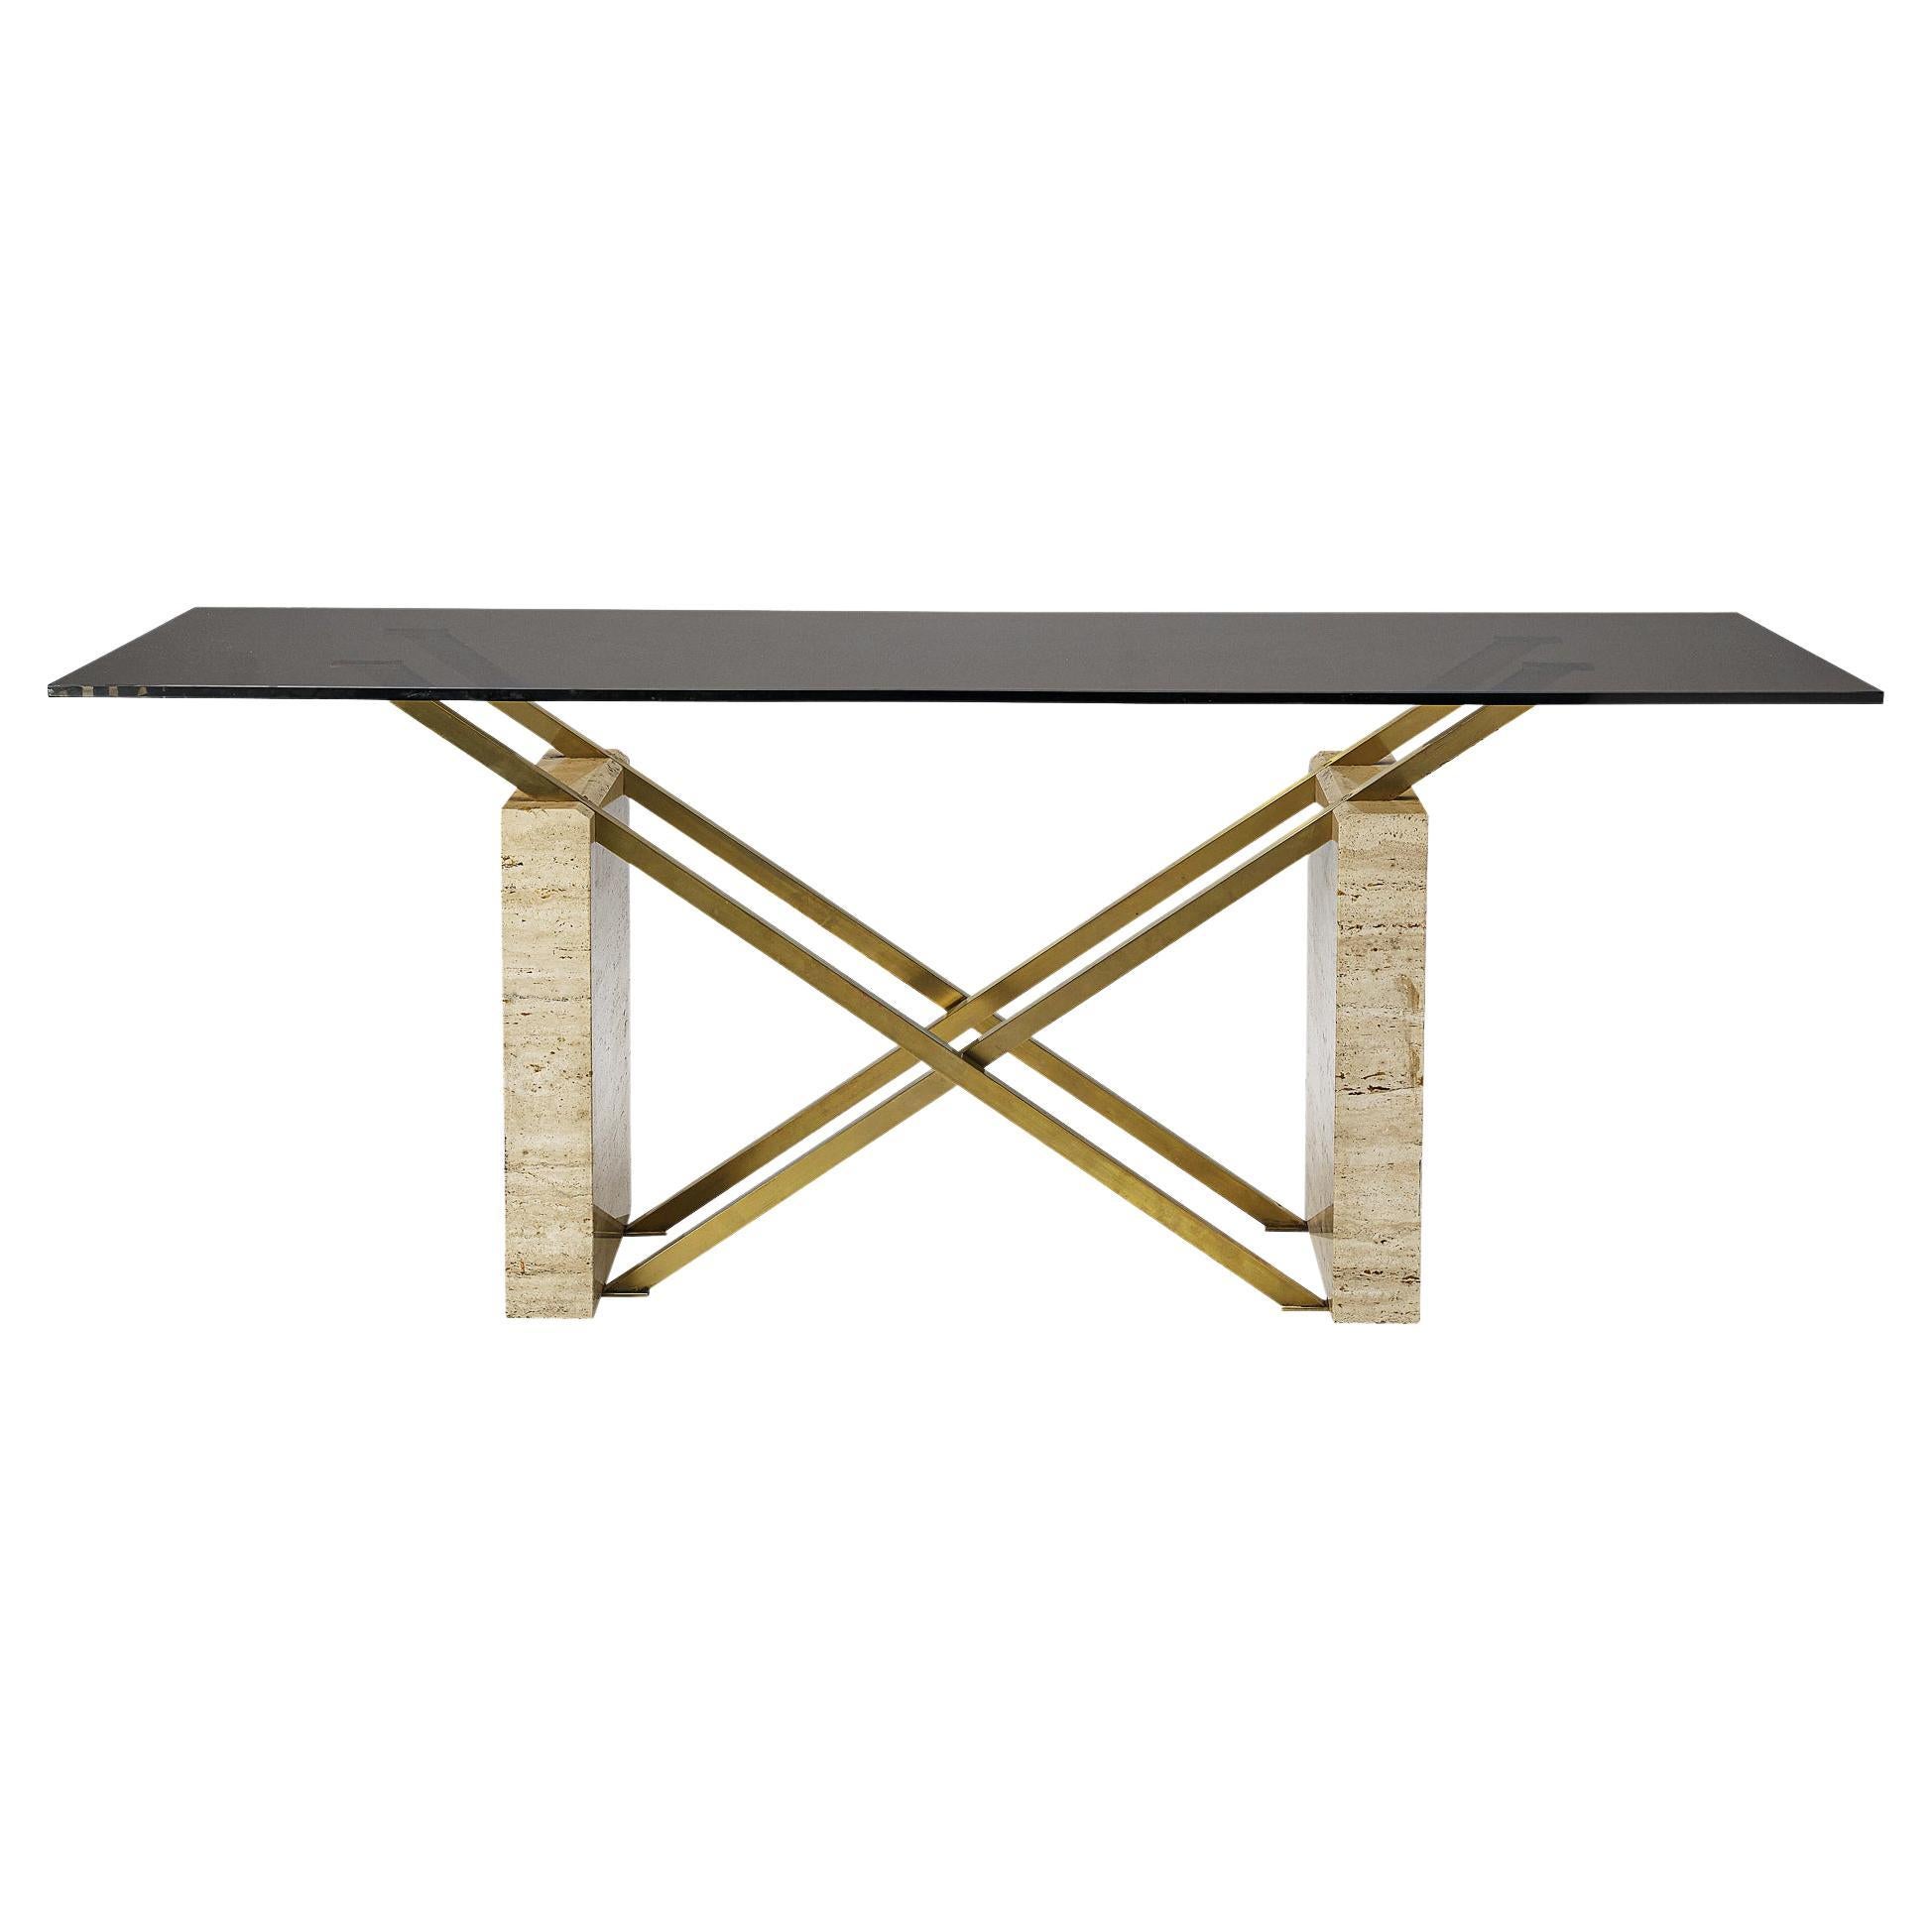 Sculptural Italian Table in Travertine, Glass and Brass